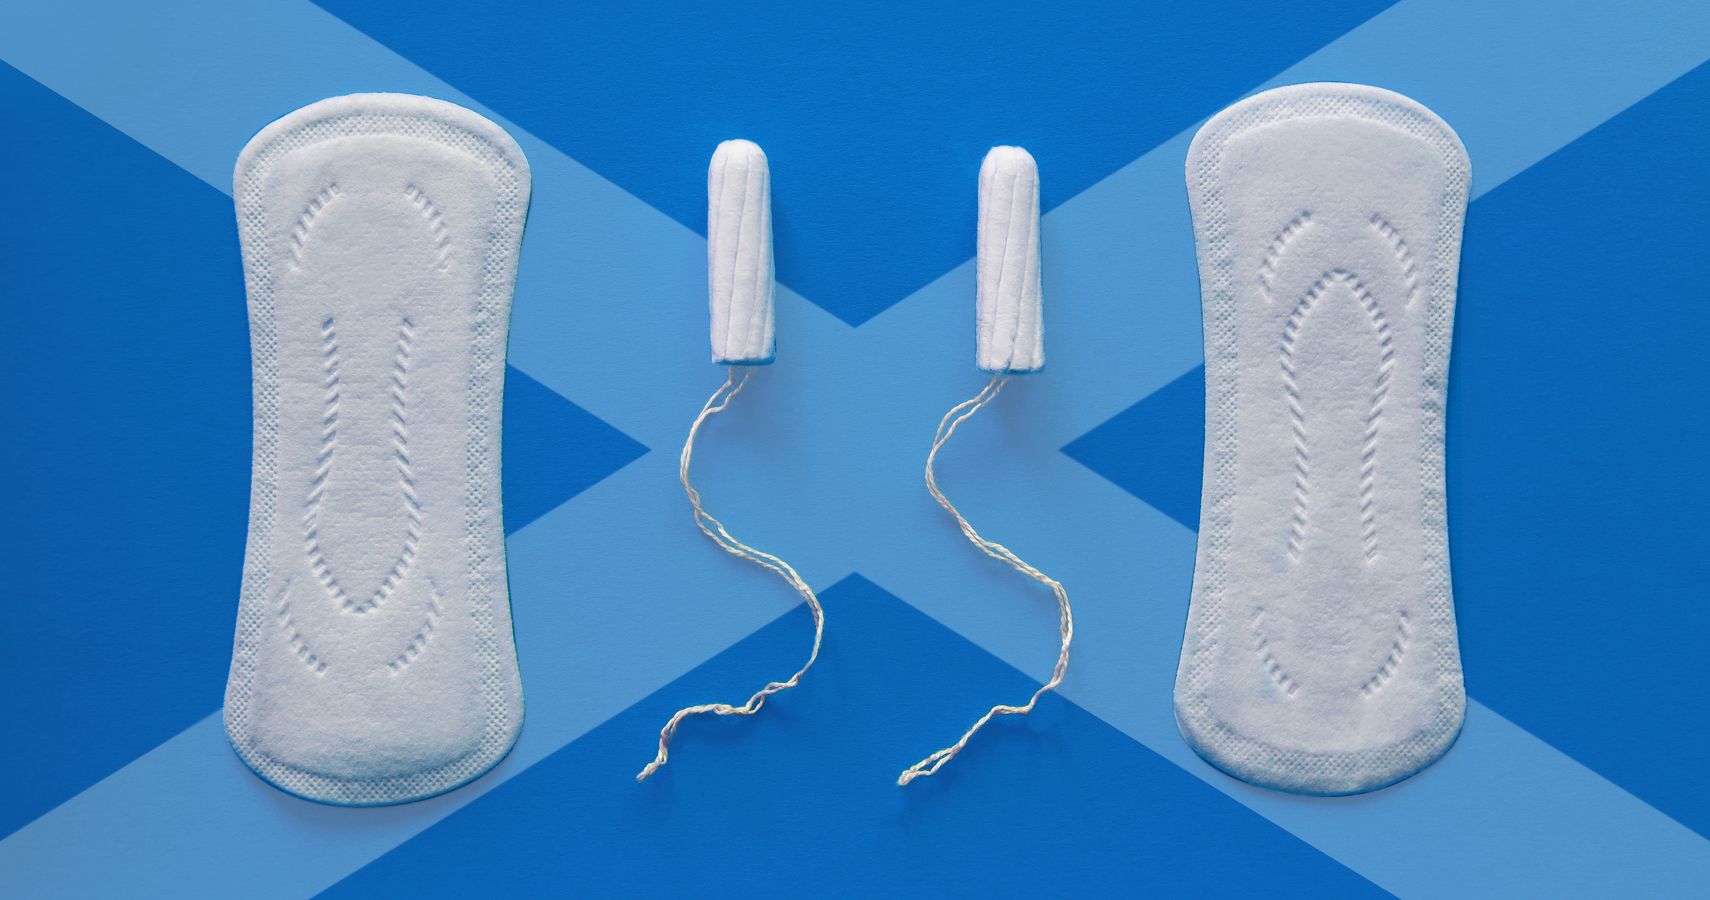 Pads and tampons